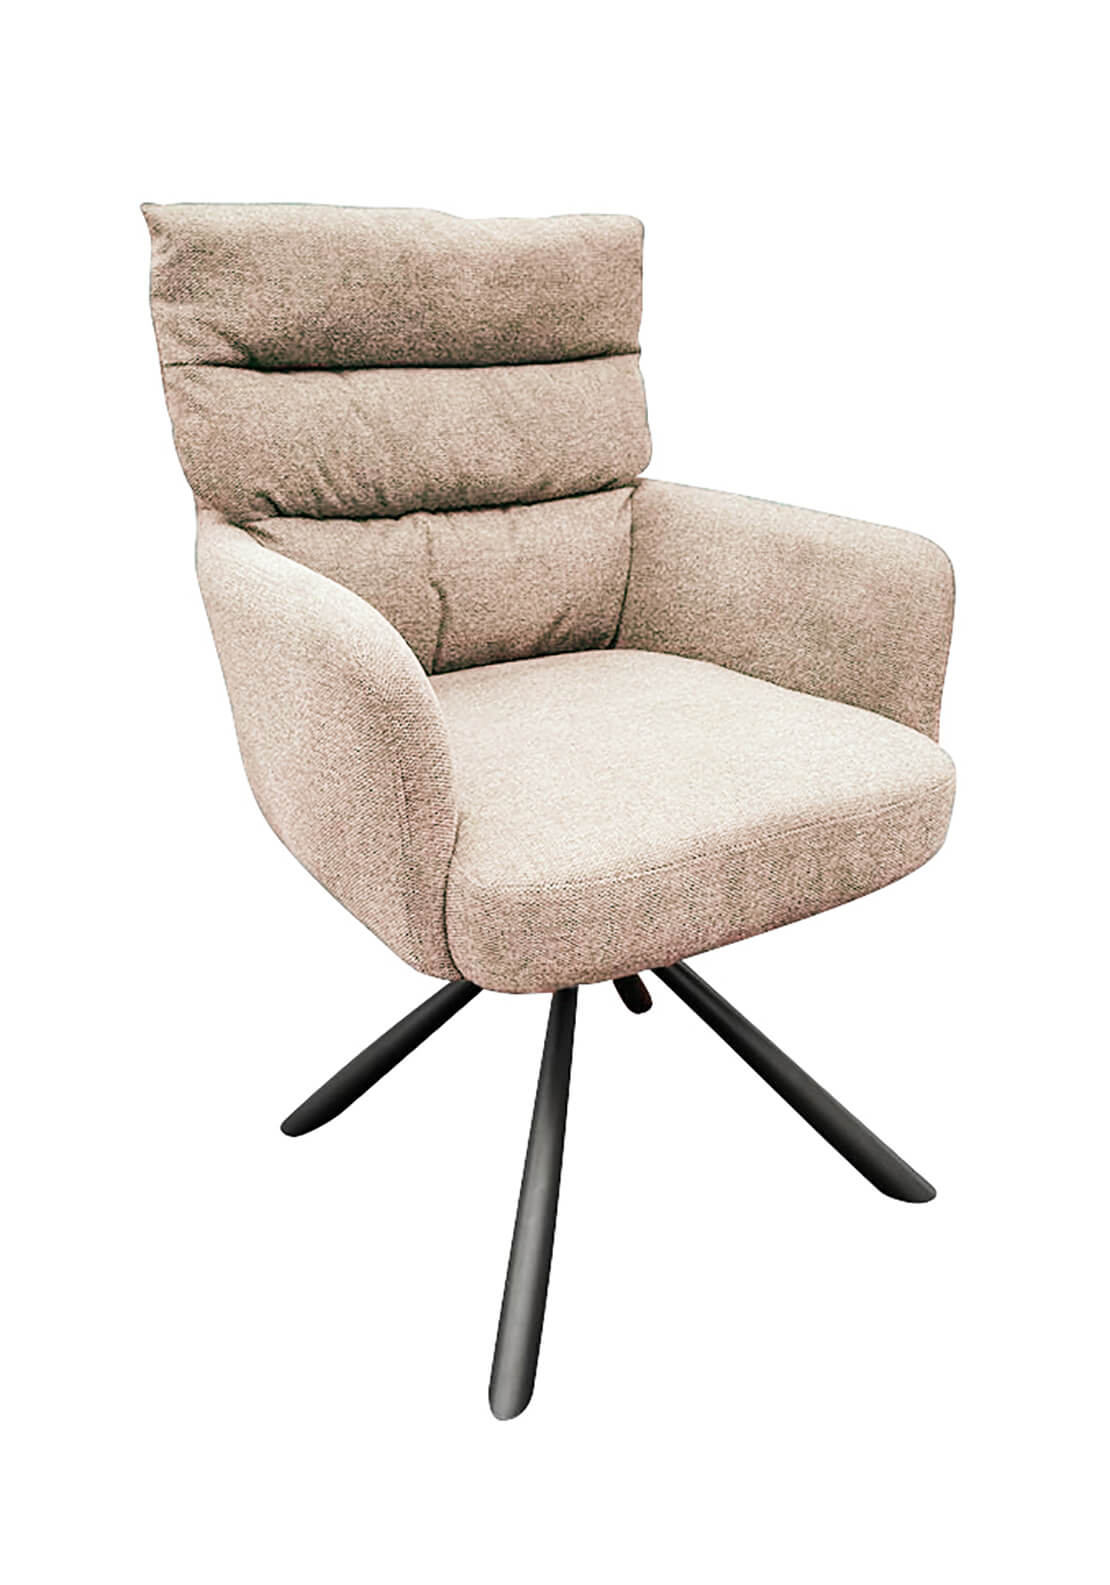 The Home Collection Stefan Swivel Dining Chair - Beige 1 Shaws Department Stores